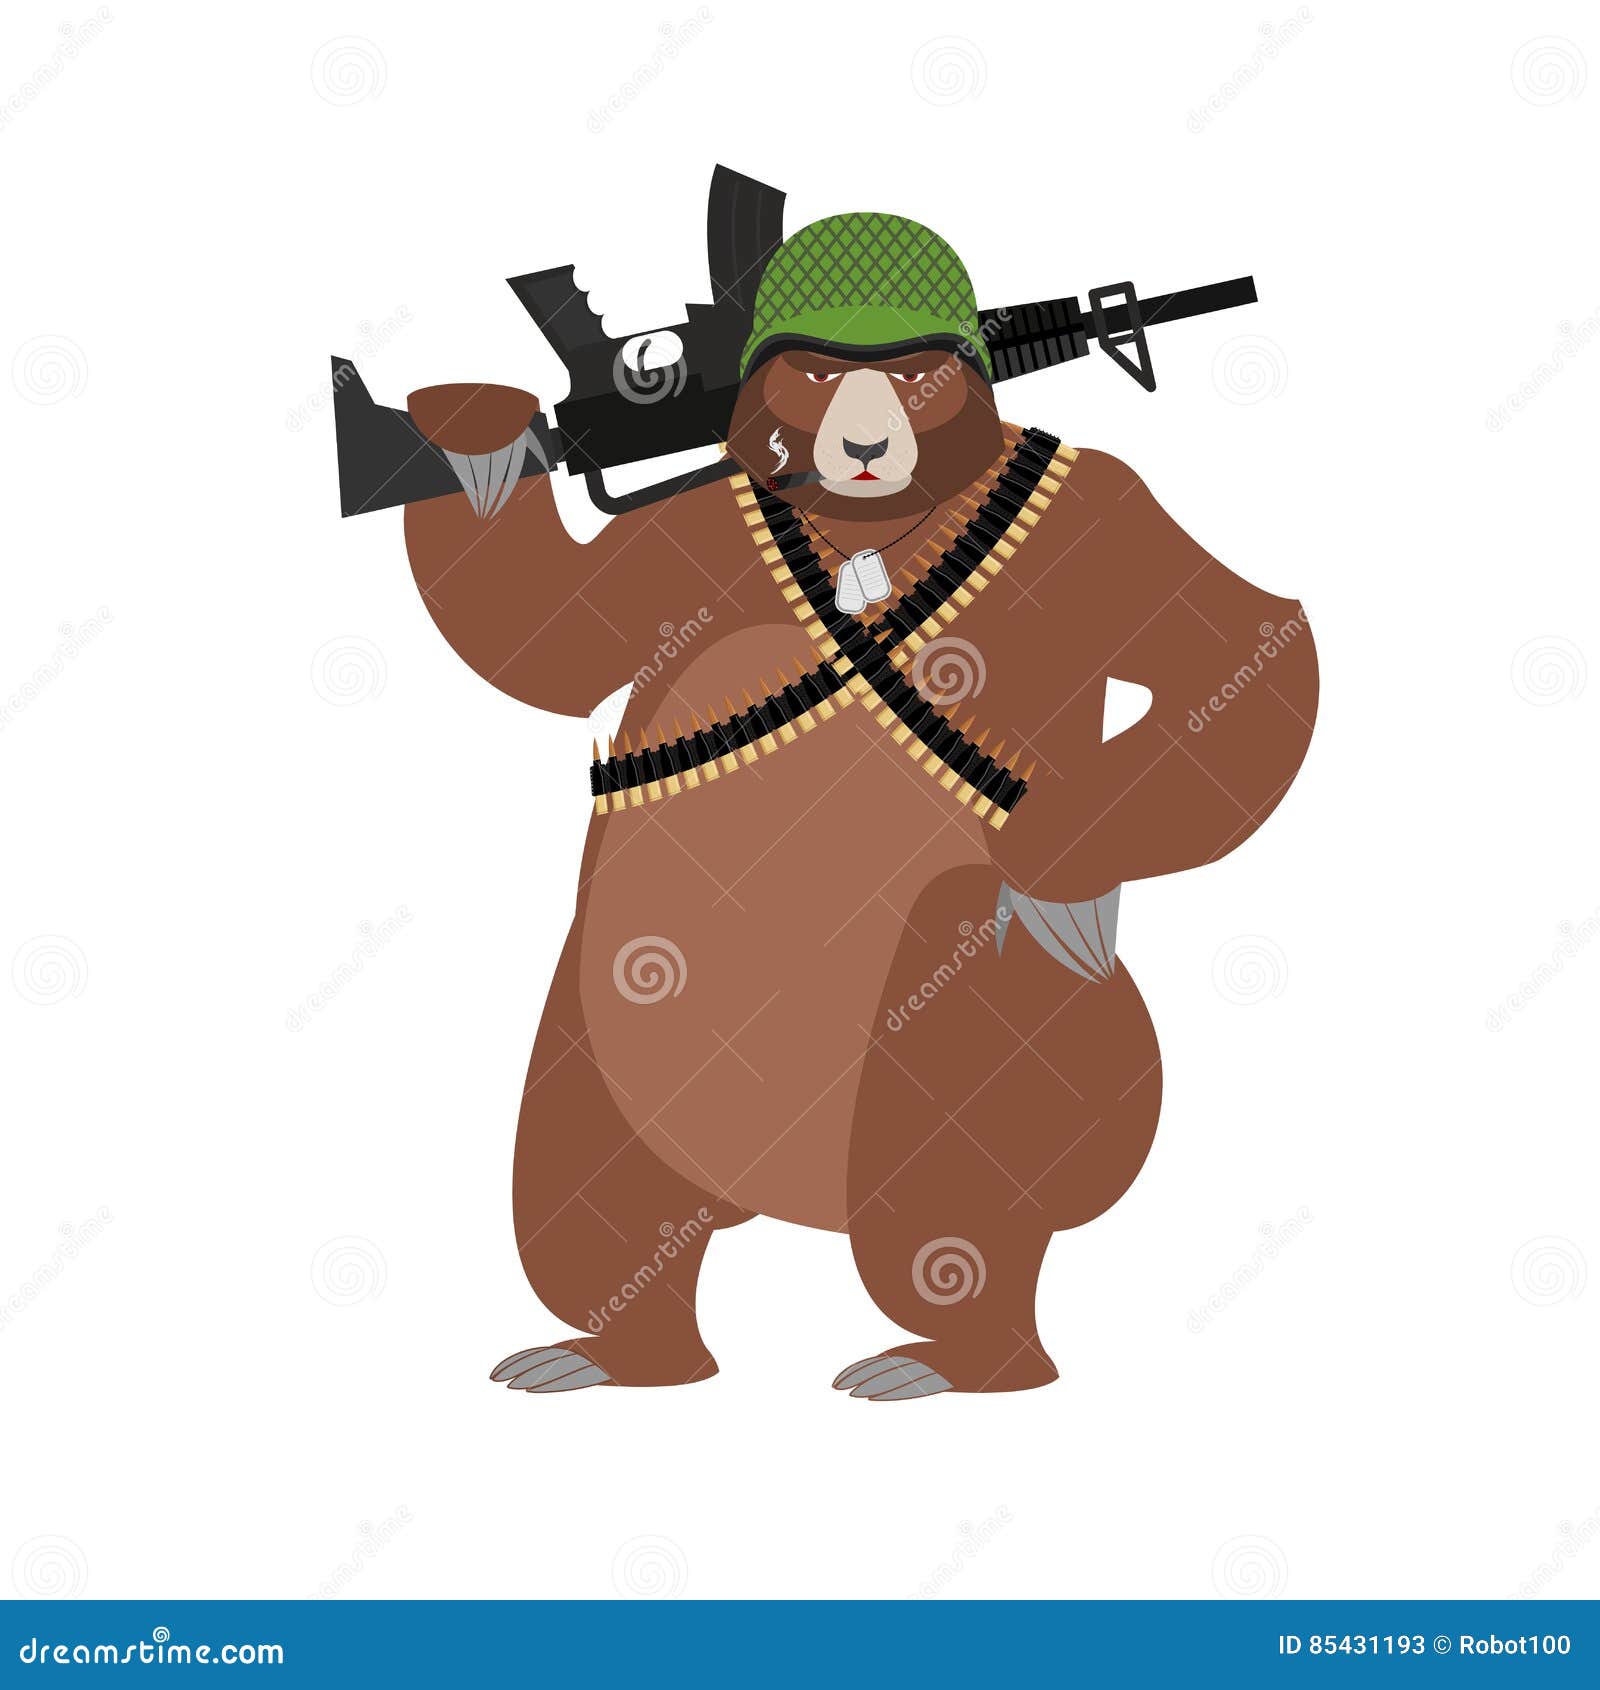 bear soldiers. grizzly military. wild animal with un. beast warrior in helmet